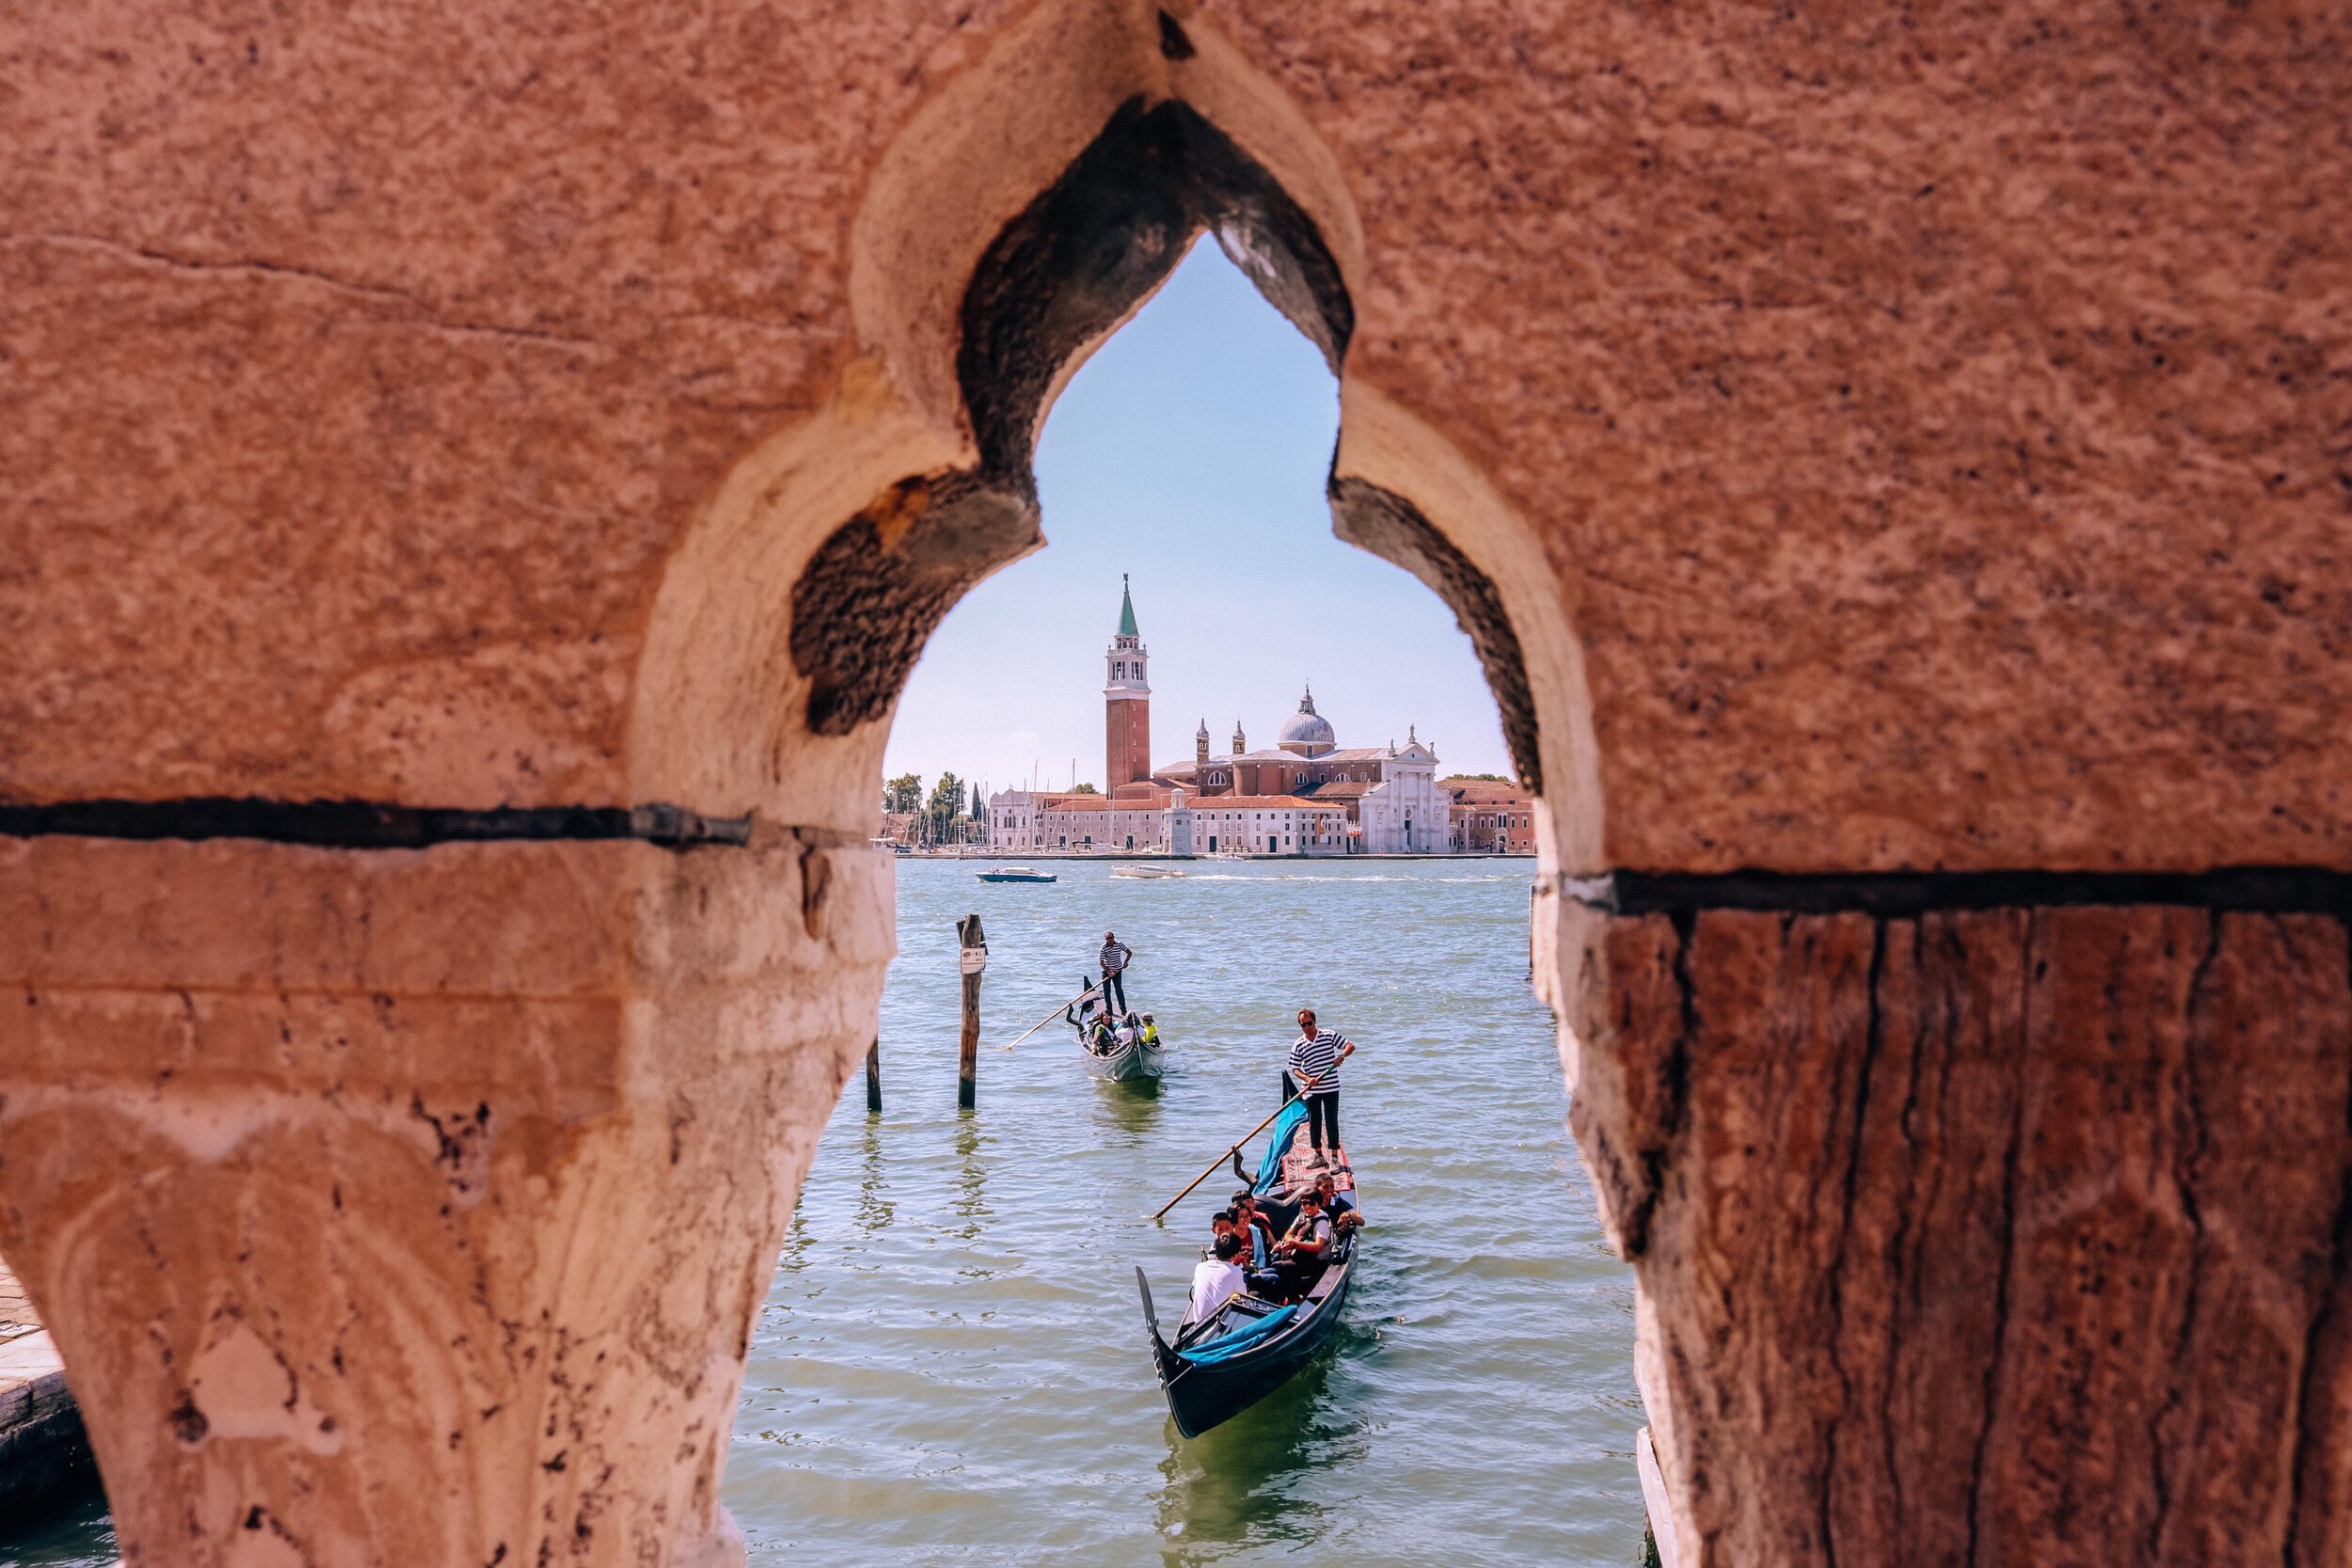 Where to find the best views in Venice | best places for panoramas, aerial views, iconic Venice photo locations | trip to Venice | Venice Instagram locations | Venice travel photography | Helena Bradbury travel blog | venice guide | Venice Italy pho…